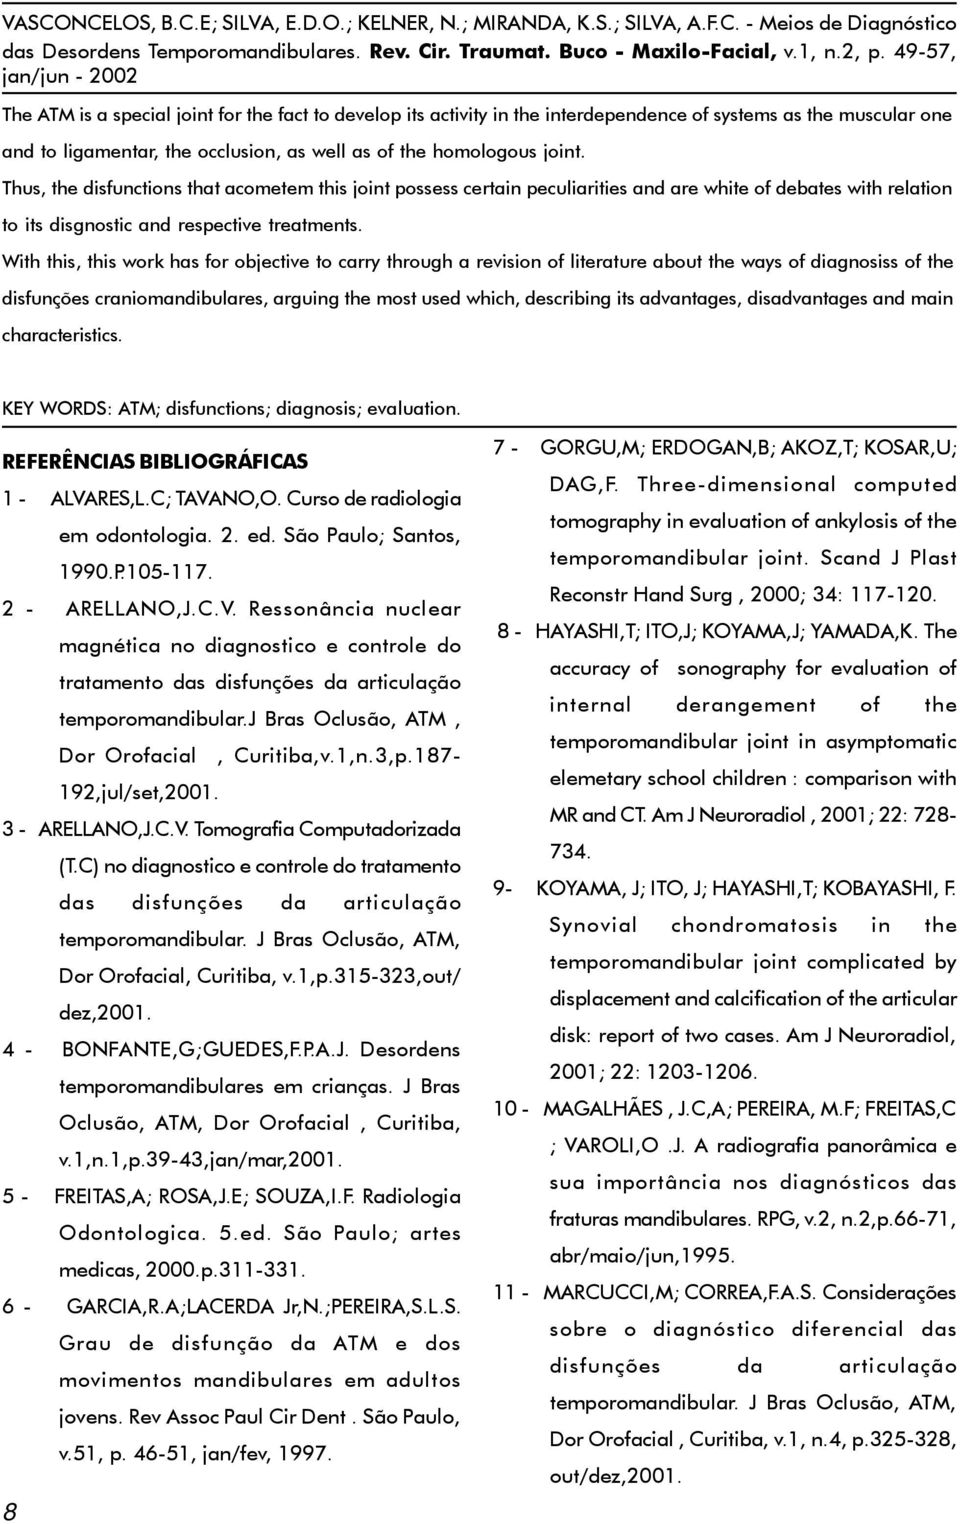 With this, this work has for objective to carry through a revision of literature about the ways of diagnosiss of the disfunções craniomandibulares, arguing the most used which, describing its